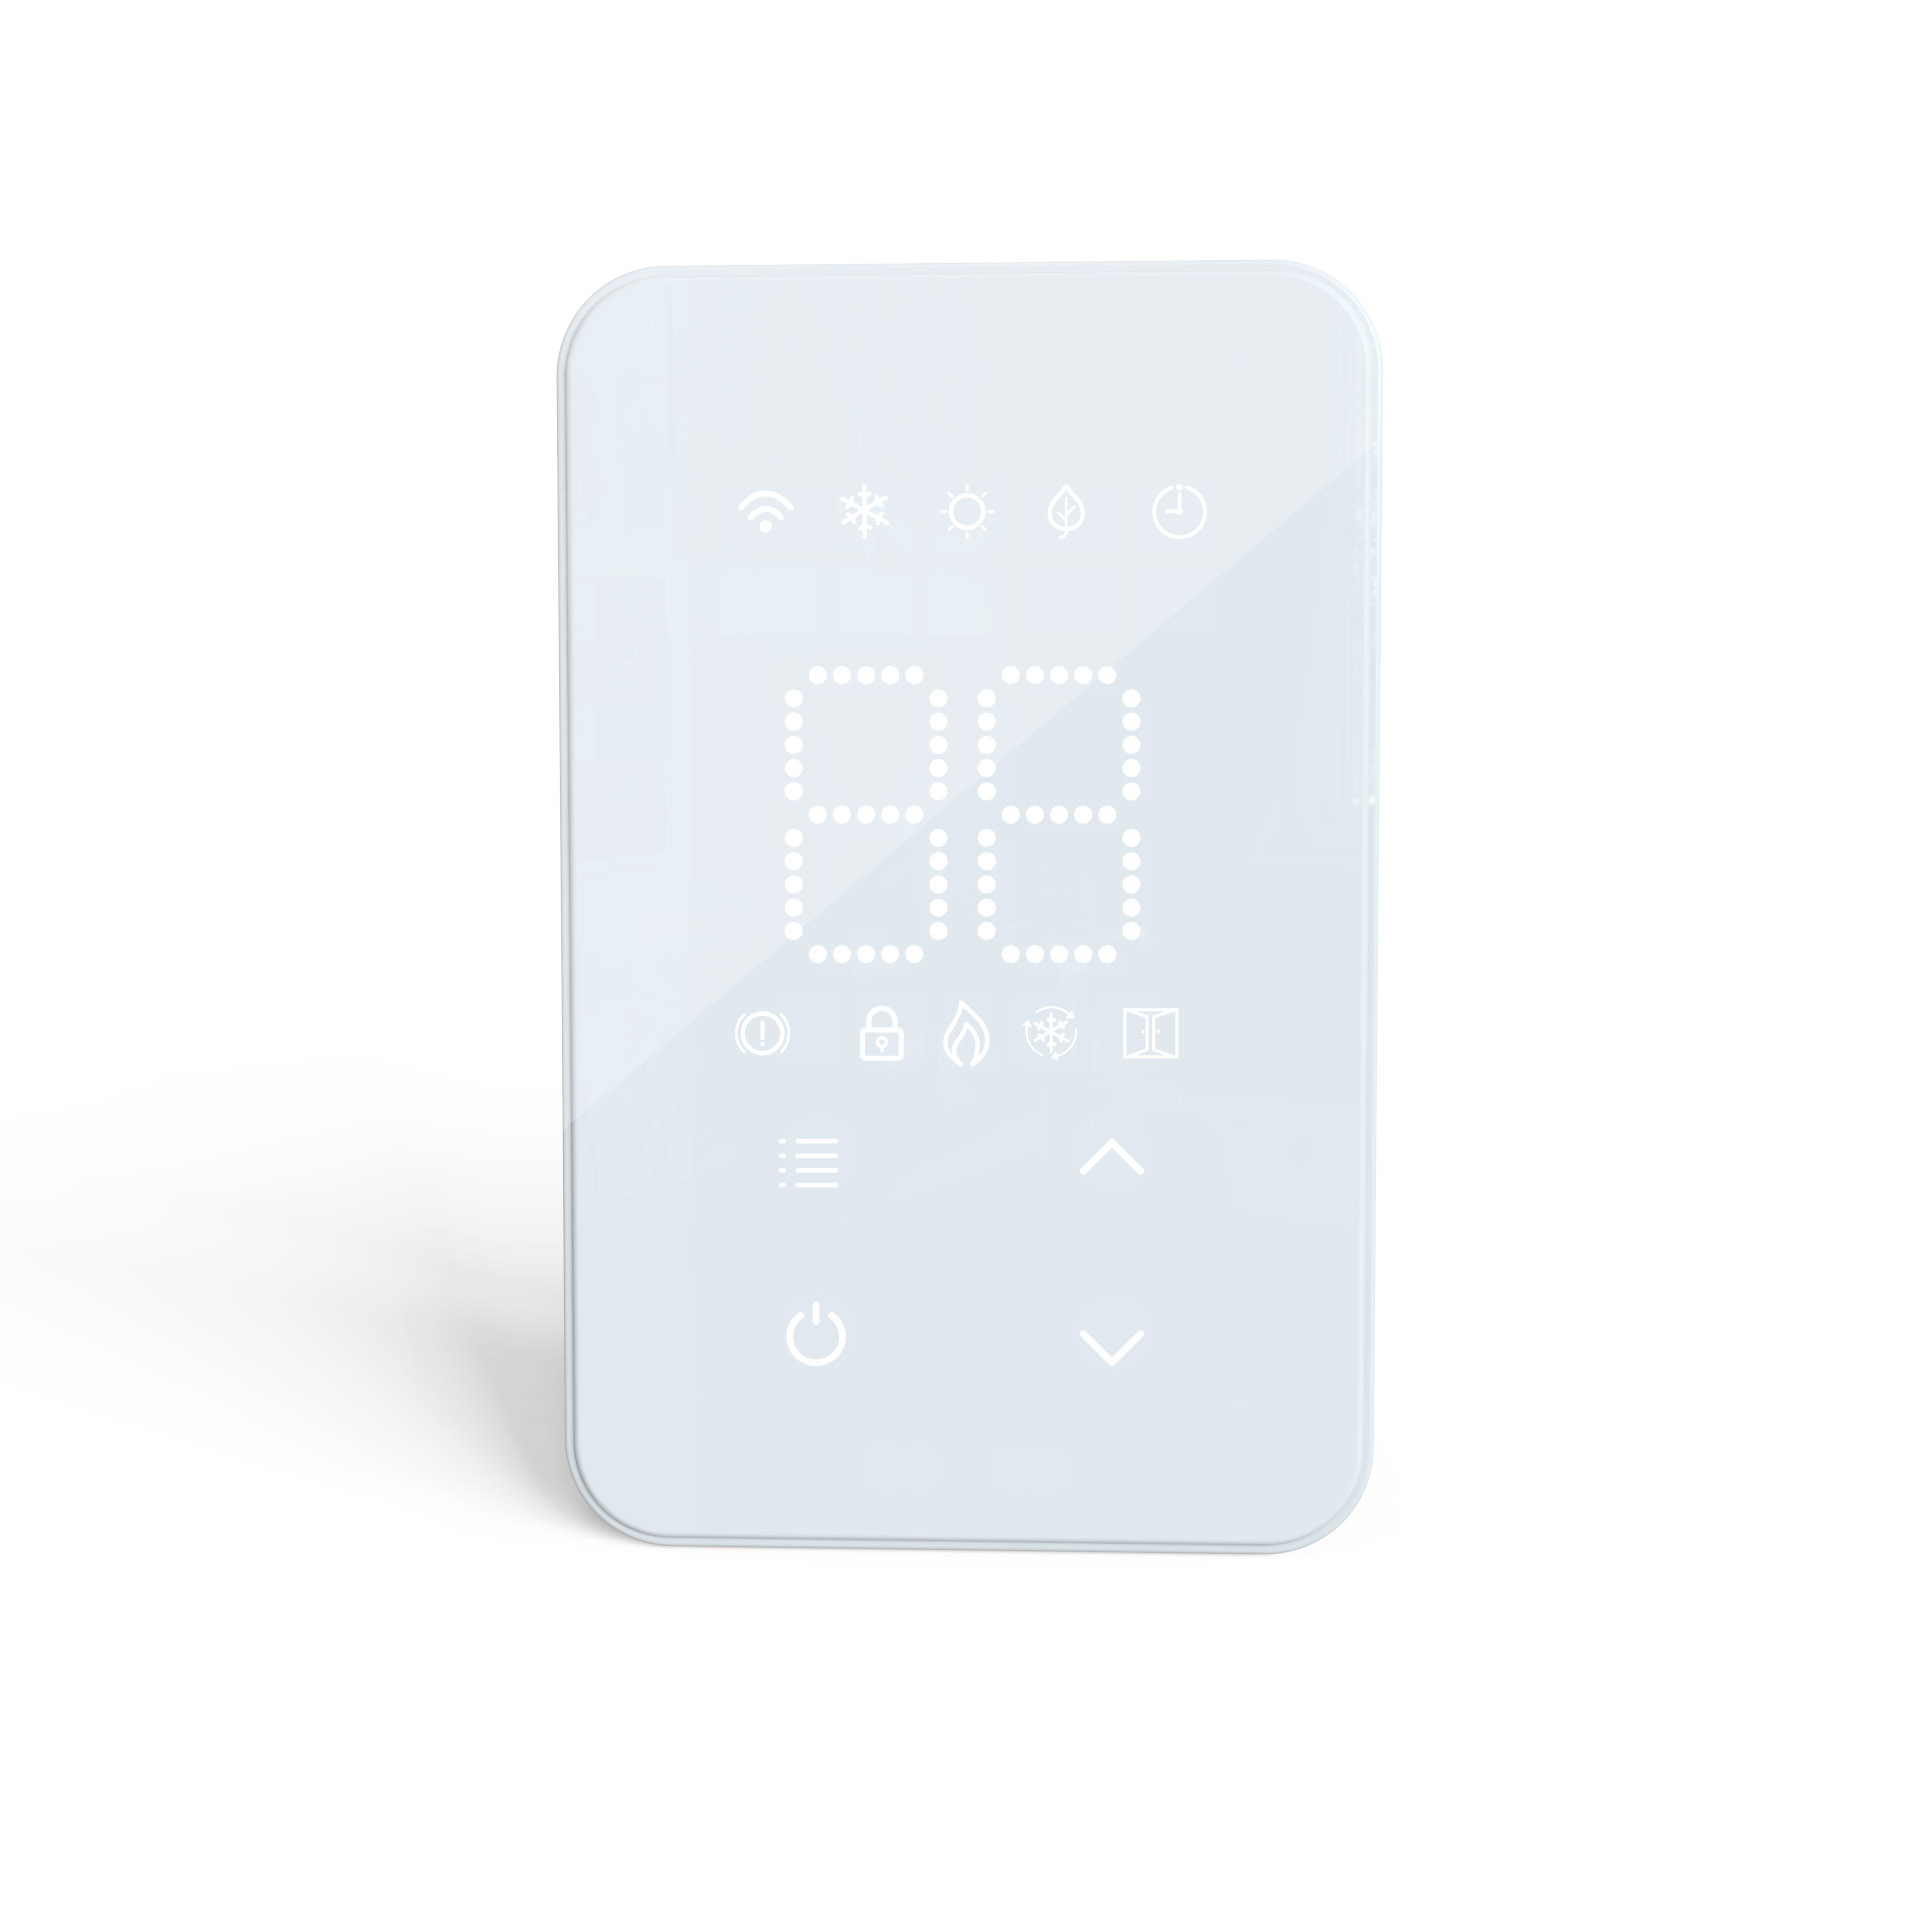 smart remote control baseboard thermostat